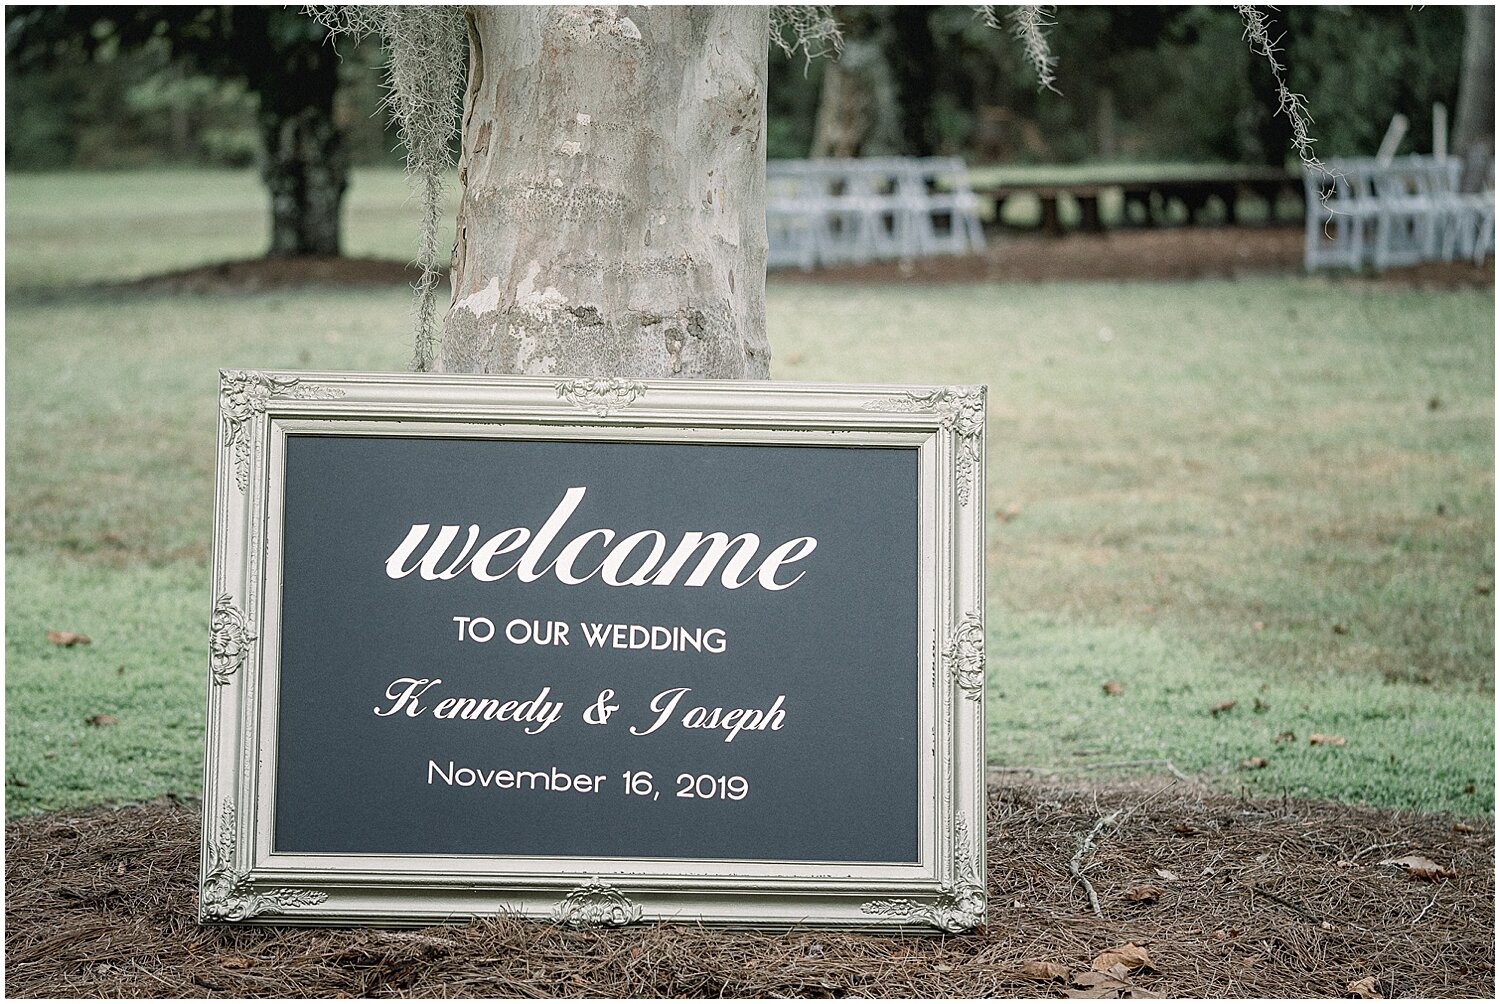  Welcome sign for wedding at The Glen Venue 